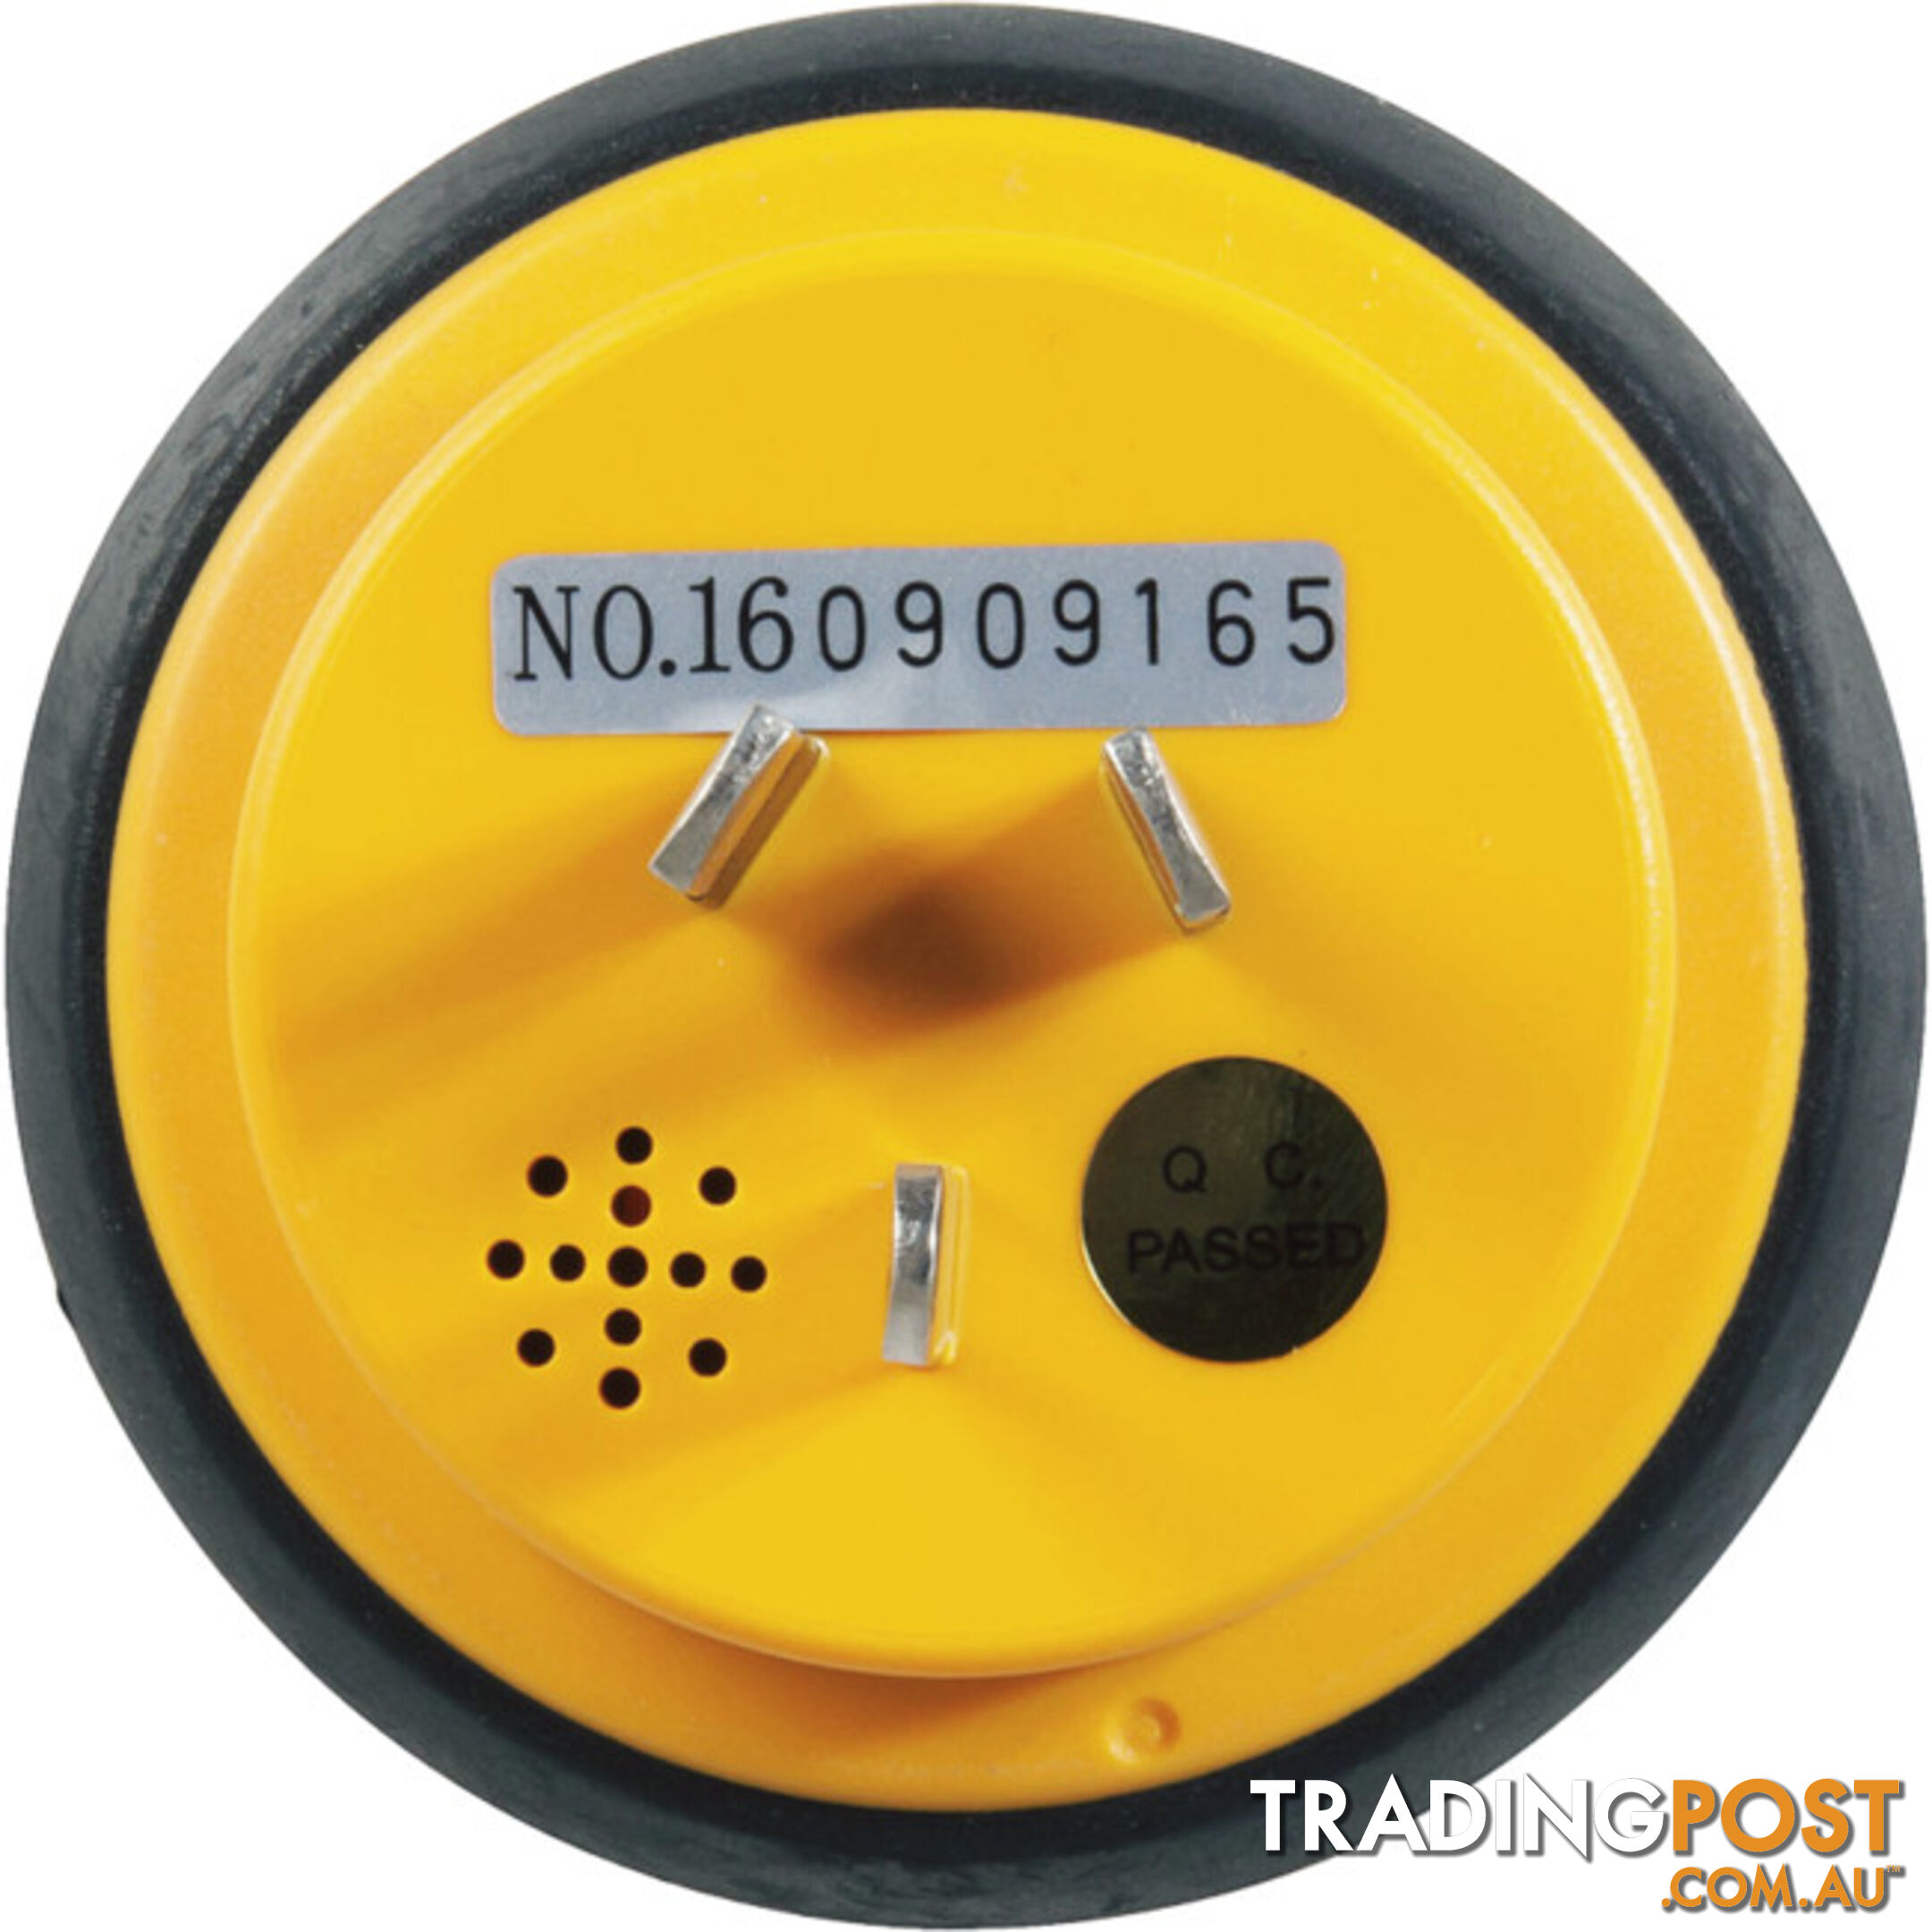 QP2004 POWER POINT LEAKAGE TESTER EARTH VOLTAGE